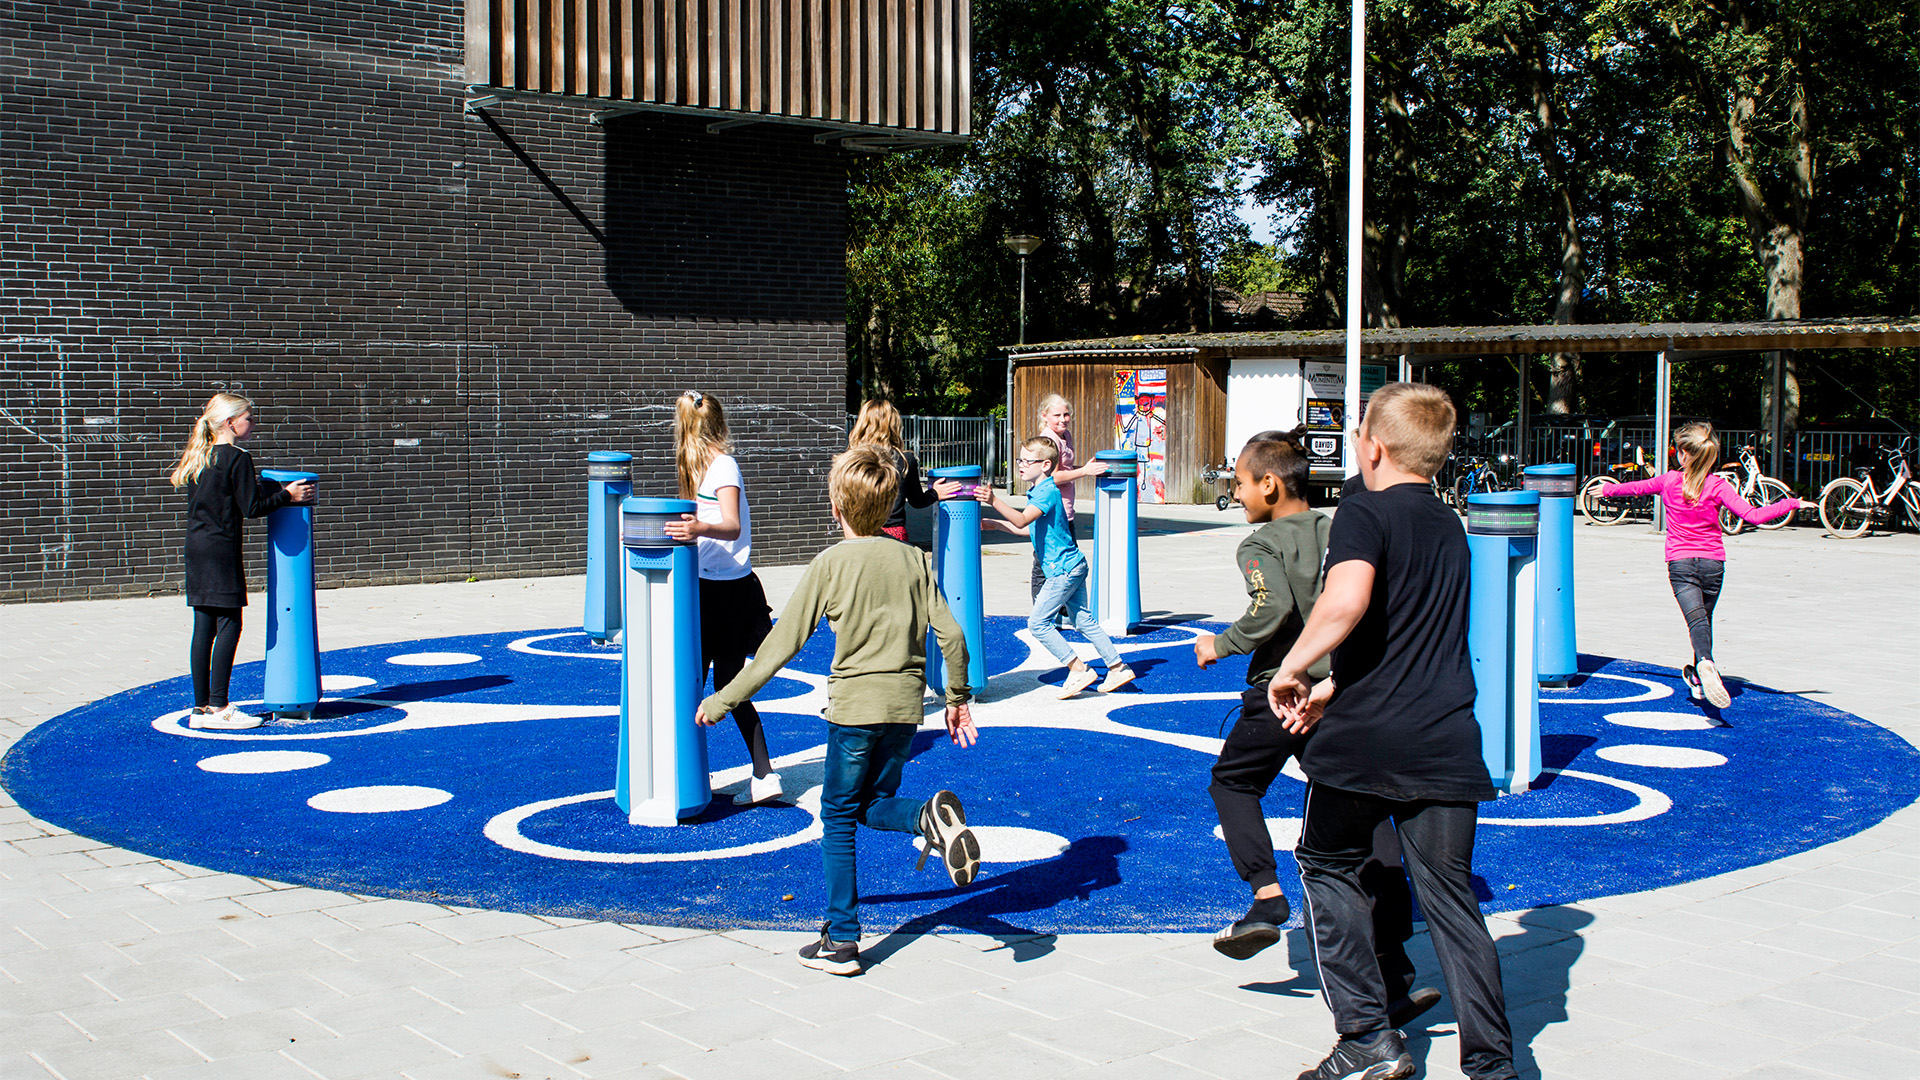 Children are playing on a colorful interactive playground. The playground features blue pillars on a circular blue mat with white spots. A brick building and trees are in the background. The children appear to be enjoying their time, running and interacting with the equipment.